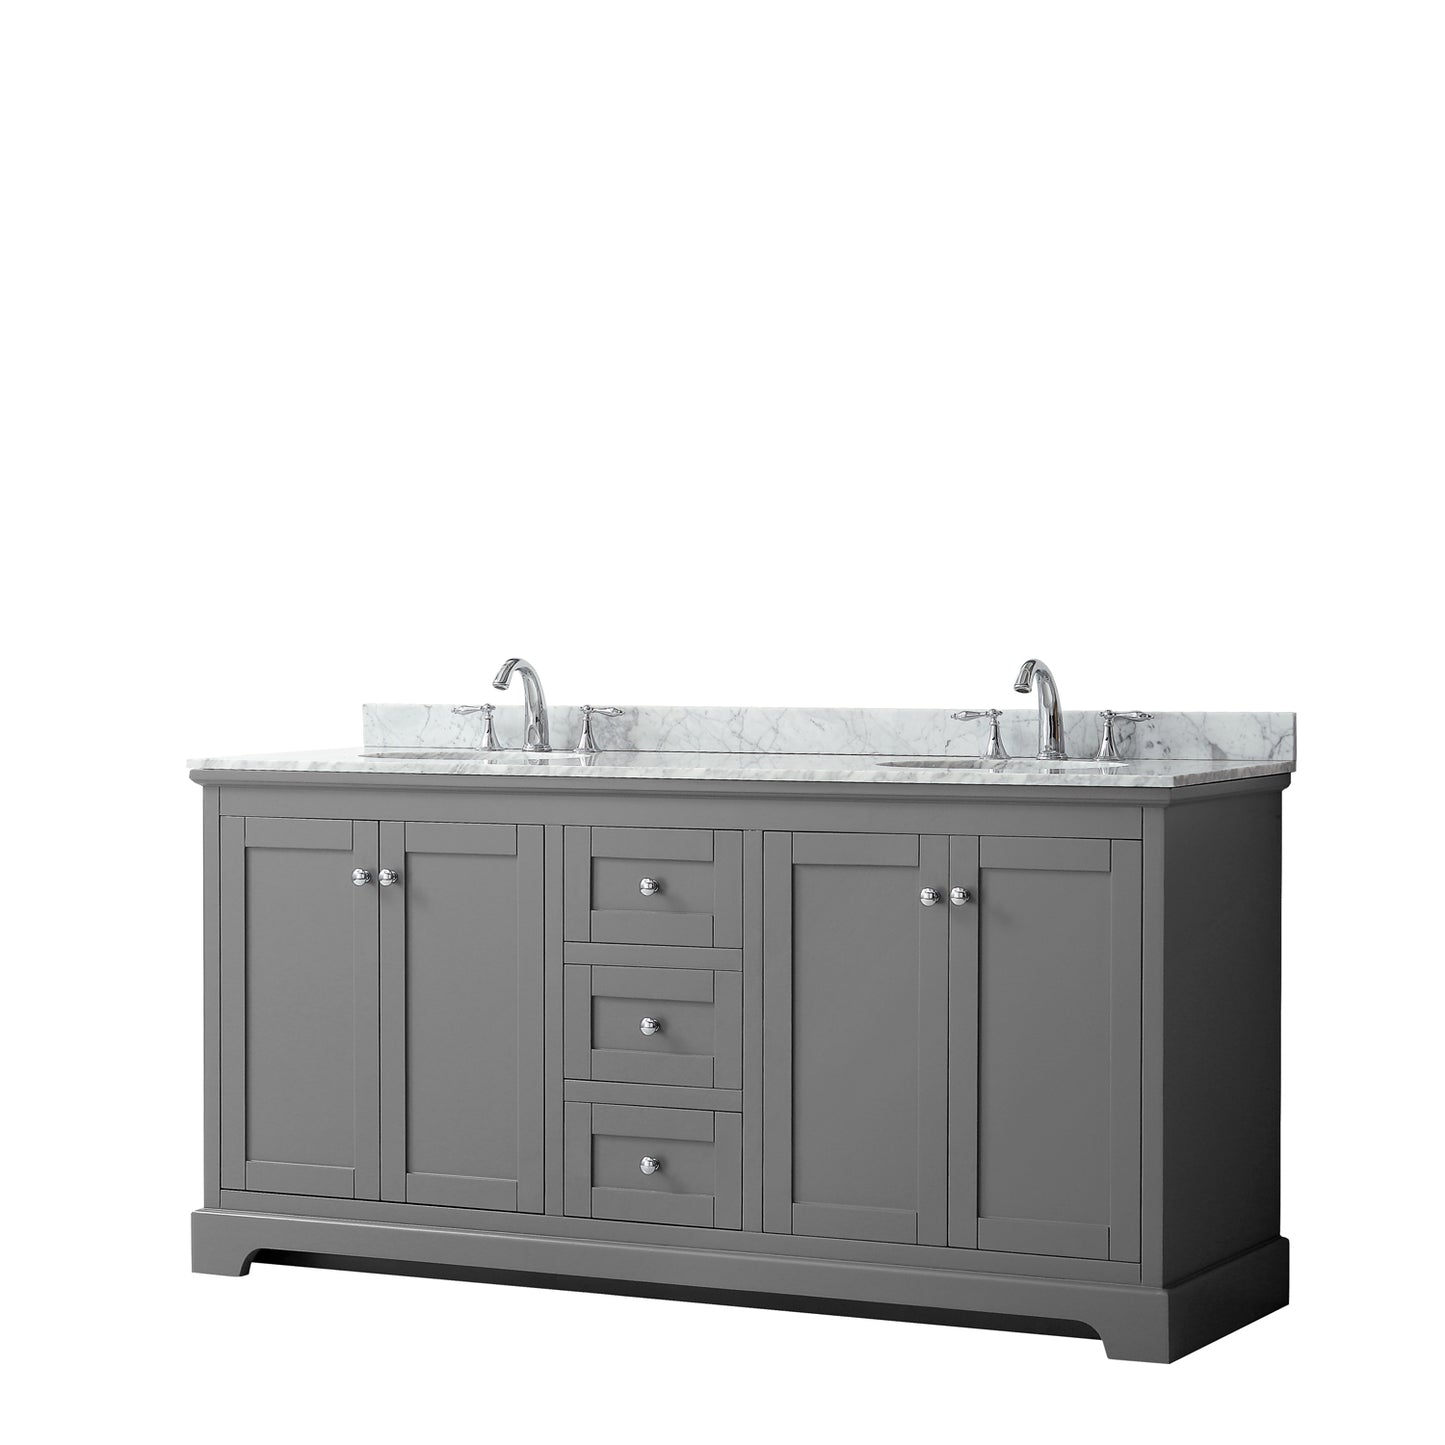 72 Inch Double Bathroom Vanity, White Carrara Marble Countertop, Undermount Oval Sinks, and No Mirror - Luxe Bathroom Vanities Luxury Bathroom Fixtures Bathroom Furniture